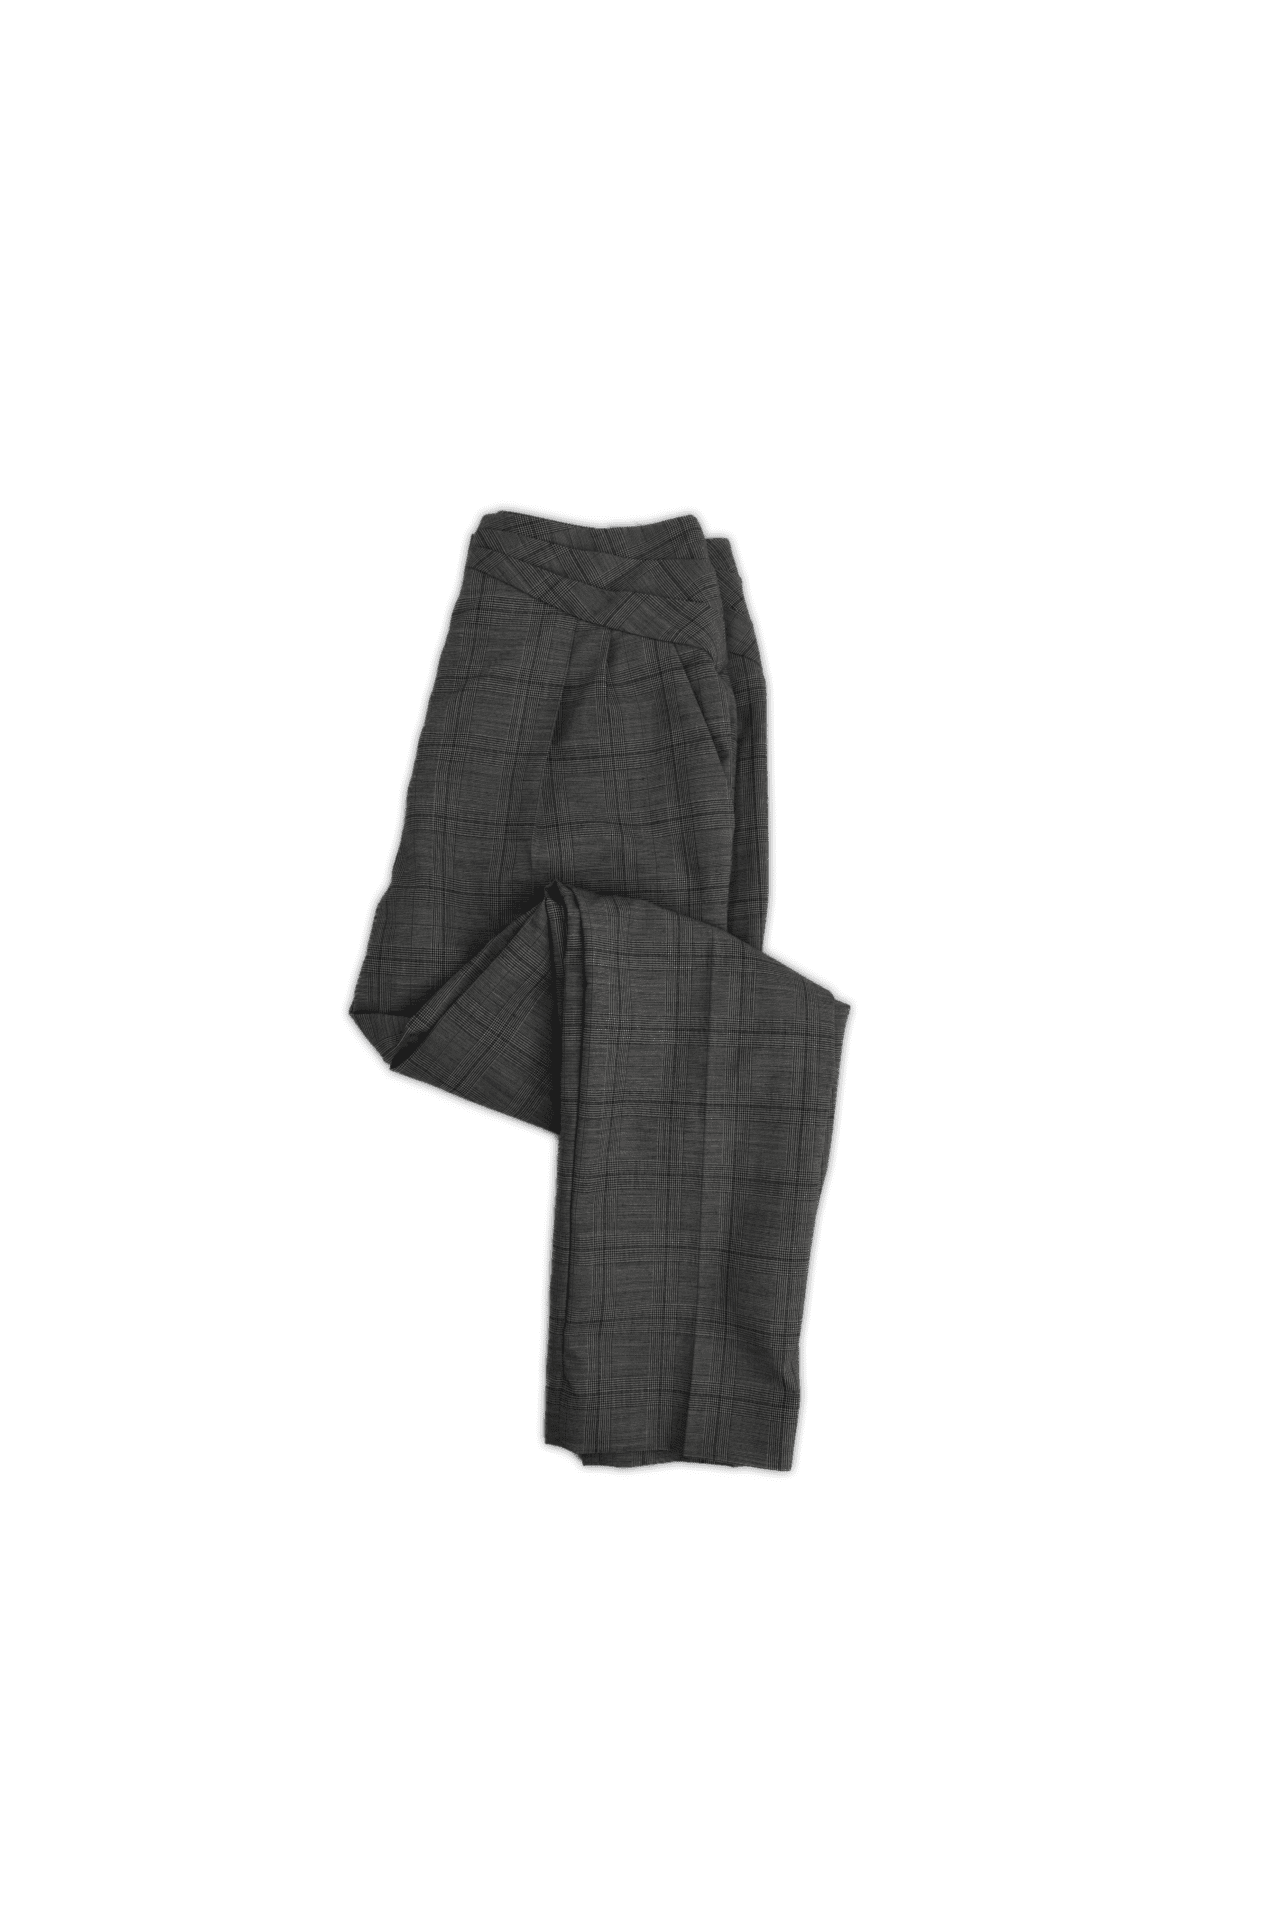 XS, Grey, Designed to sit at the waist, these endlessly soft wool pants offer a tapered leg style that descend to ankle length featuring a classic fly front closure, pleats at the front of the waist, angled pockets at the hip, and welt pockets at the back